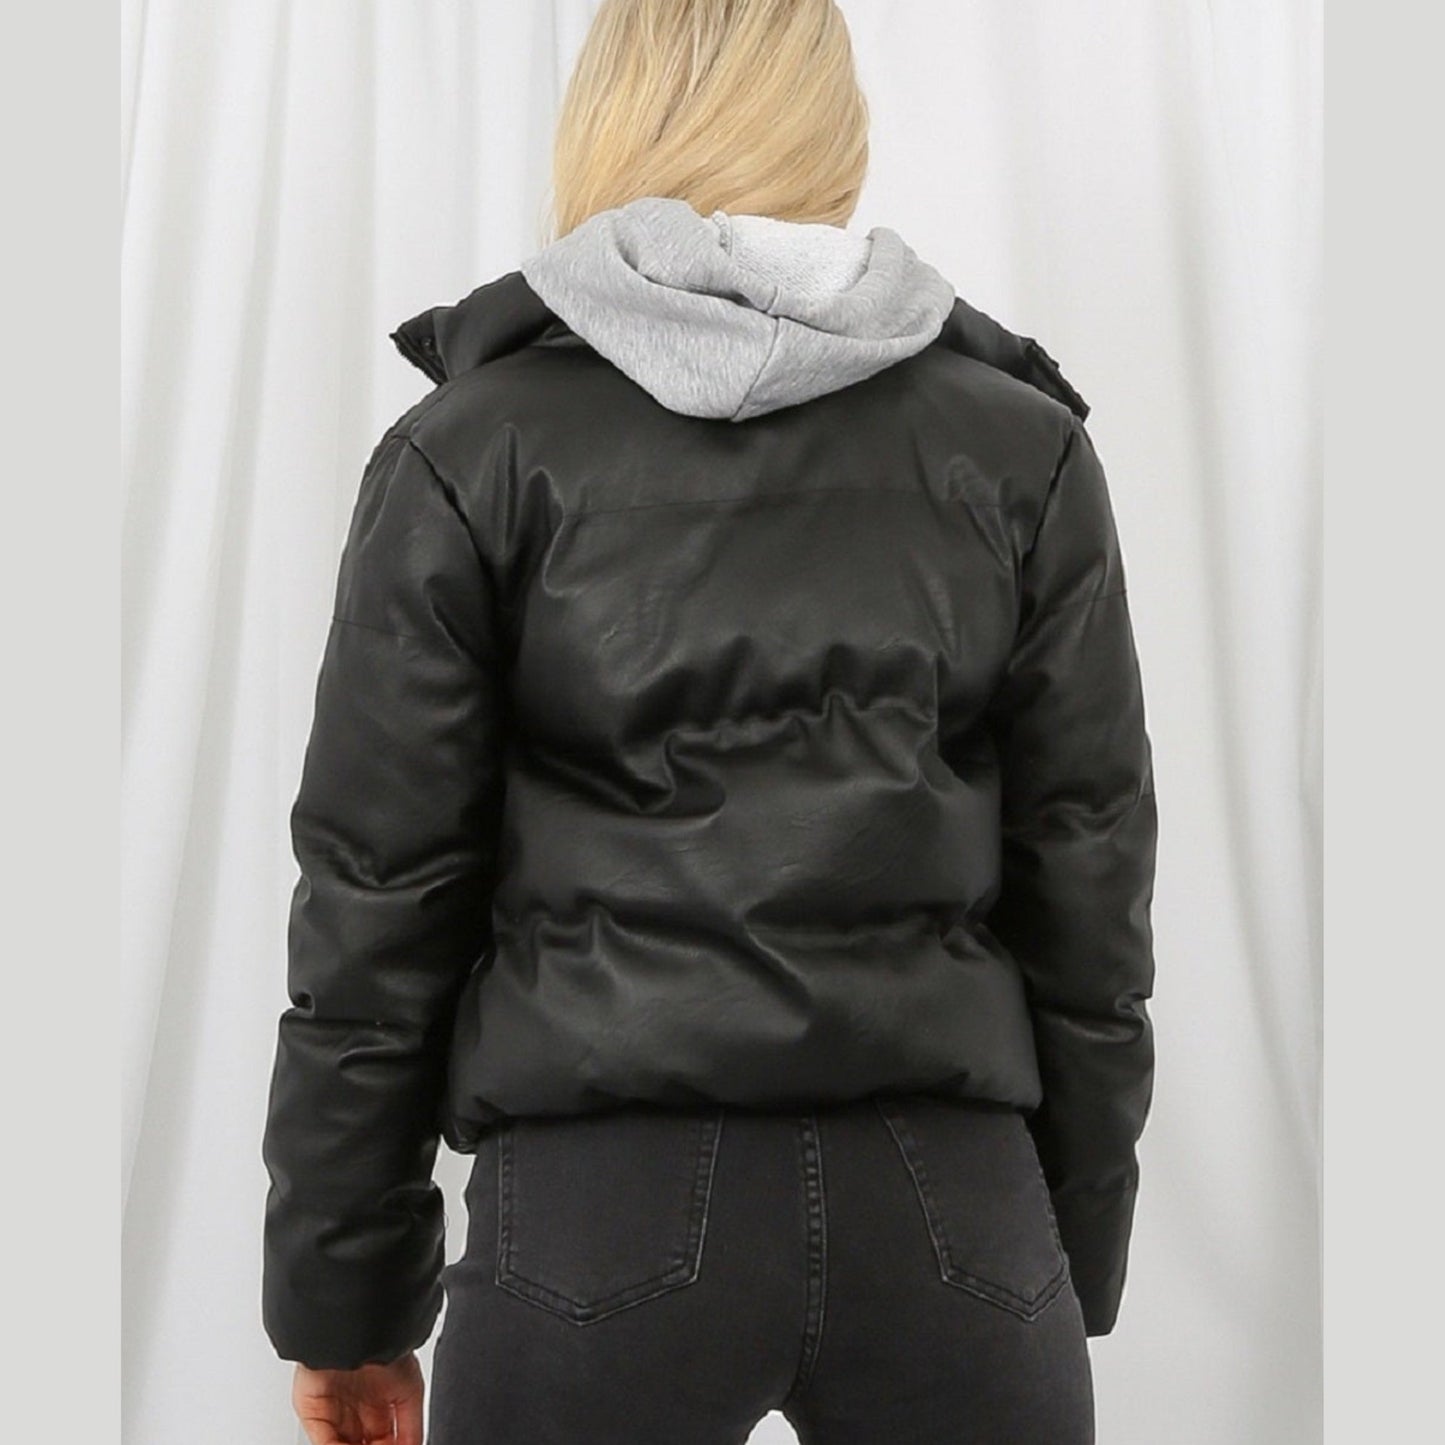 Women's Boxy Puffer Jacket - BeExtra! Apparel & More